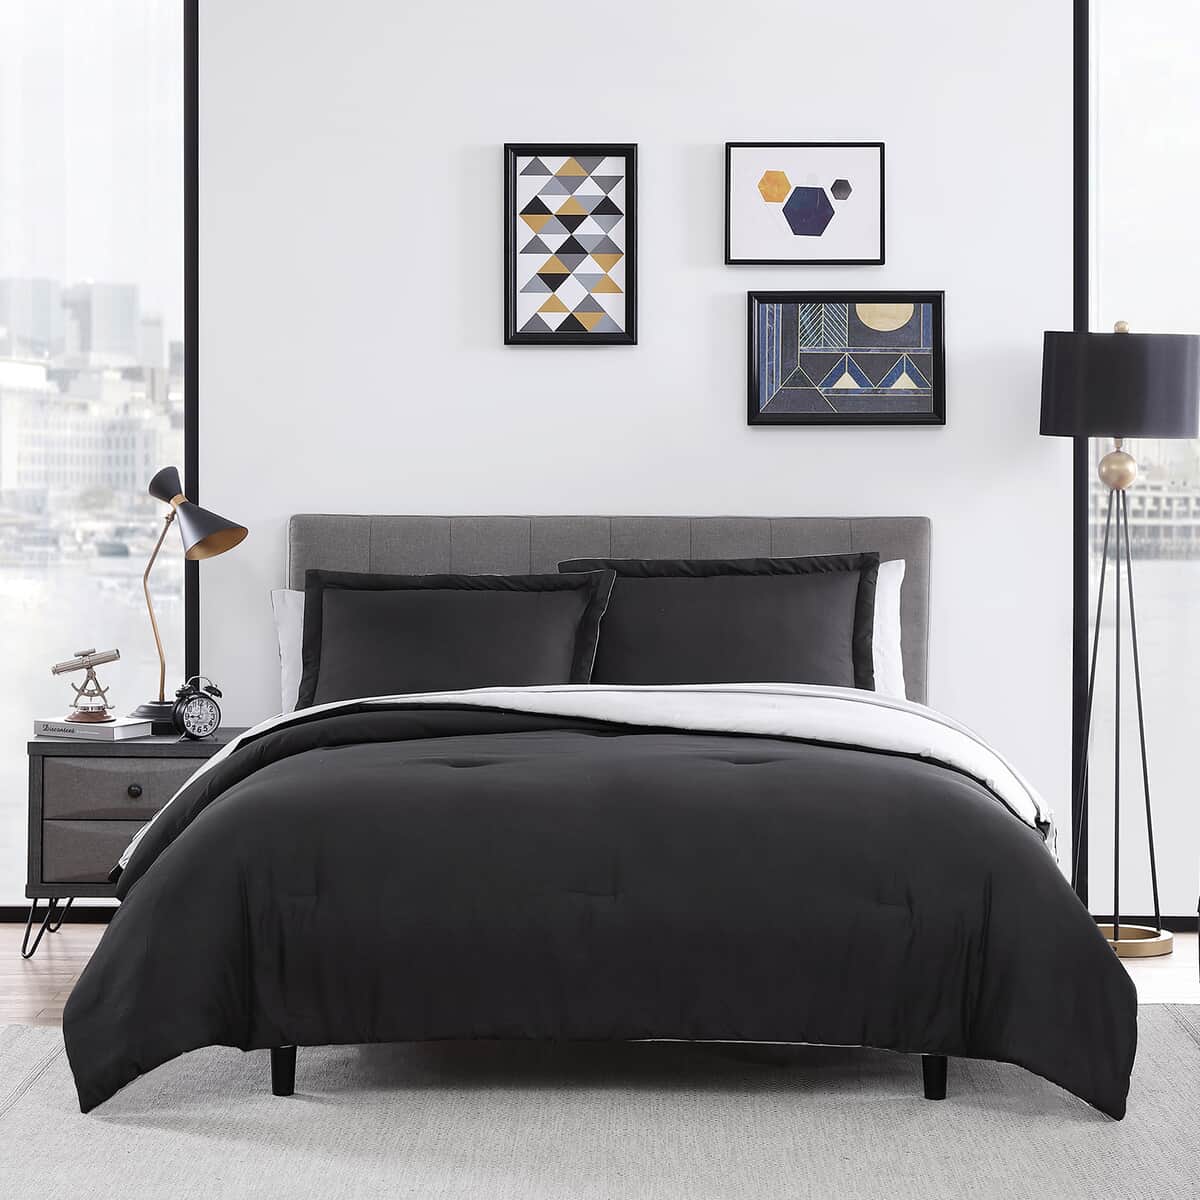 The Nesting Company - Chestnut Reversible 7 Piece Bed in a bag Comforter Set - Black & Gray (Queen) | Bed Comforters | Polyester Comforter | Bedding Sets | Quilt Set image number 2